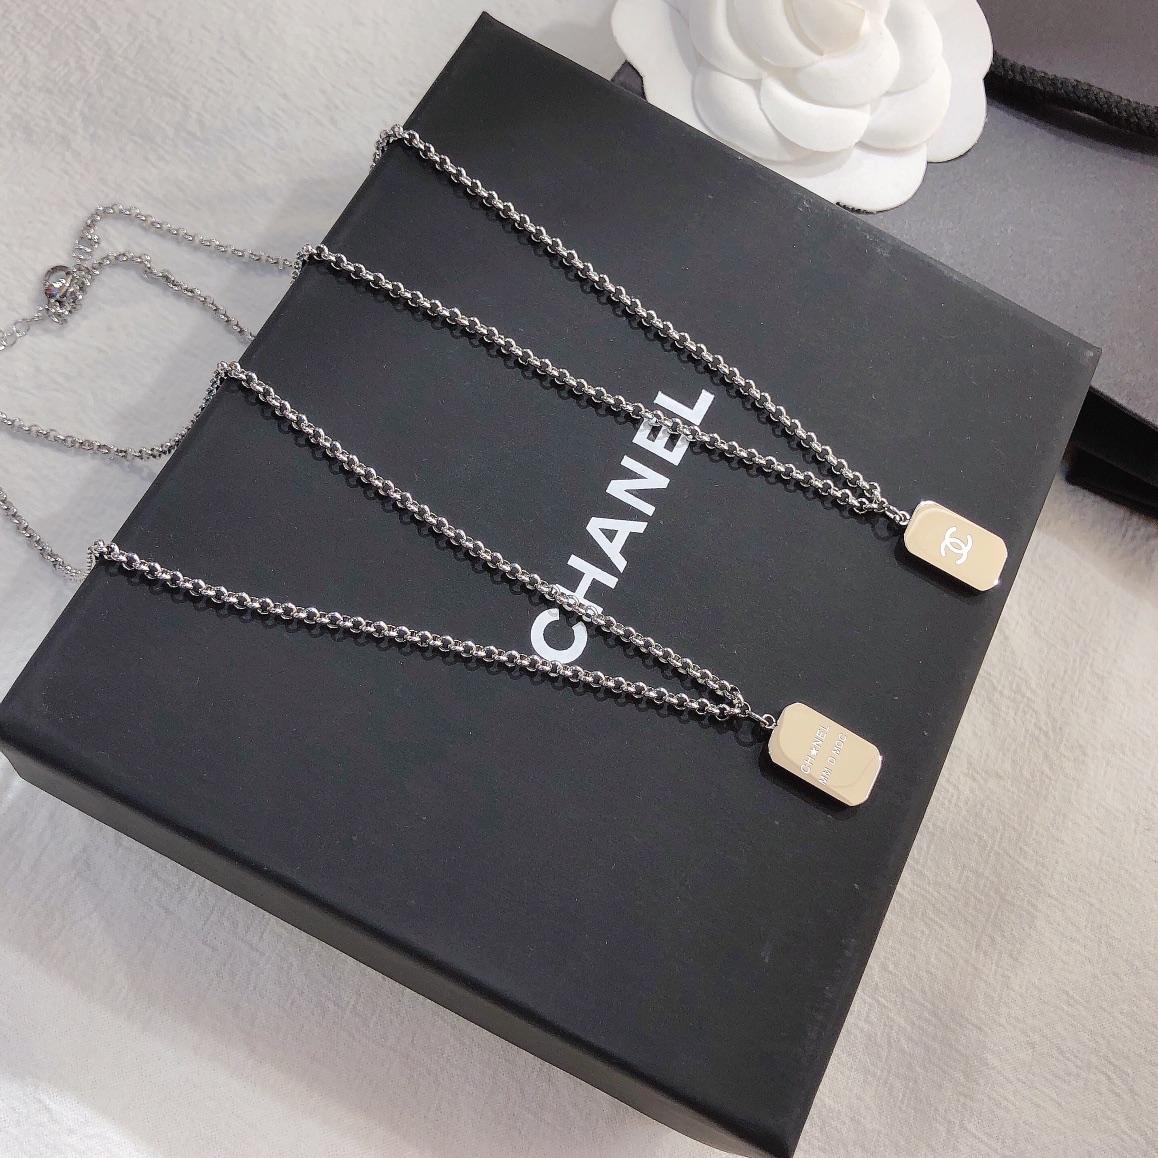 X314  Chanel necklace 106093